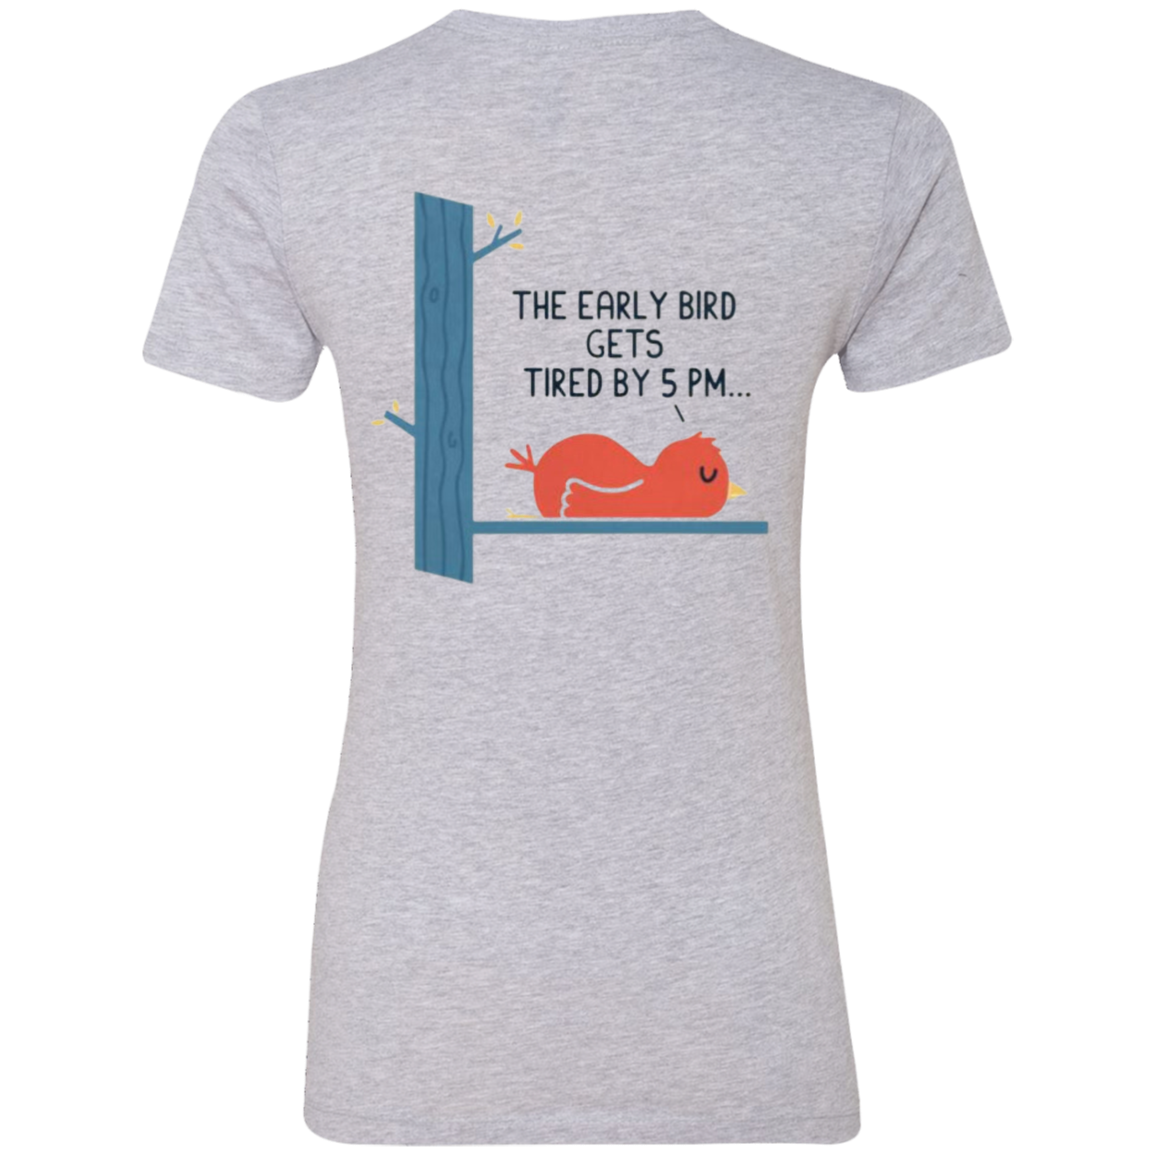 Early Bird Gets tried by 5pm! Design on both sides of T-Shirt